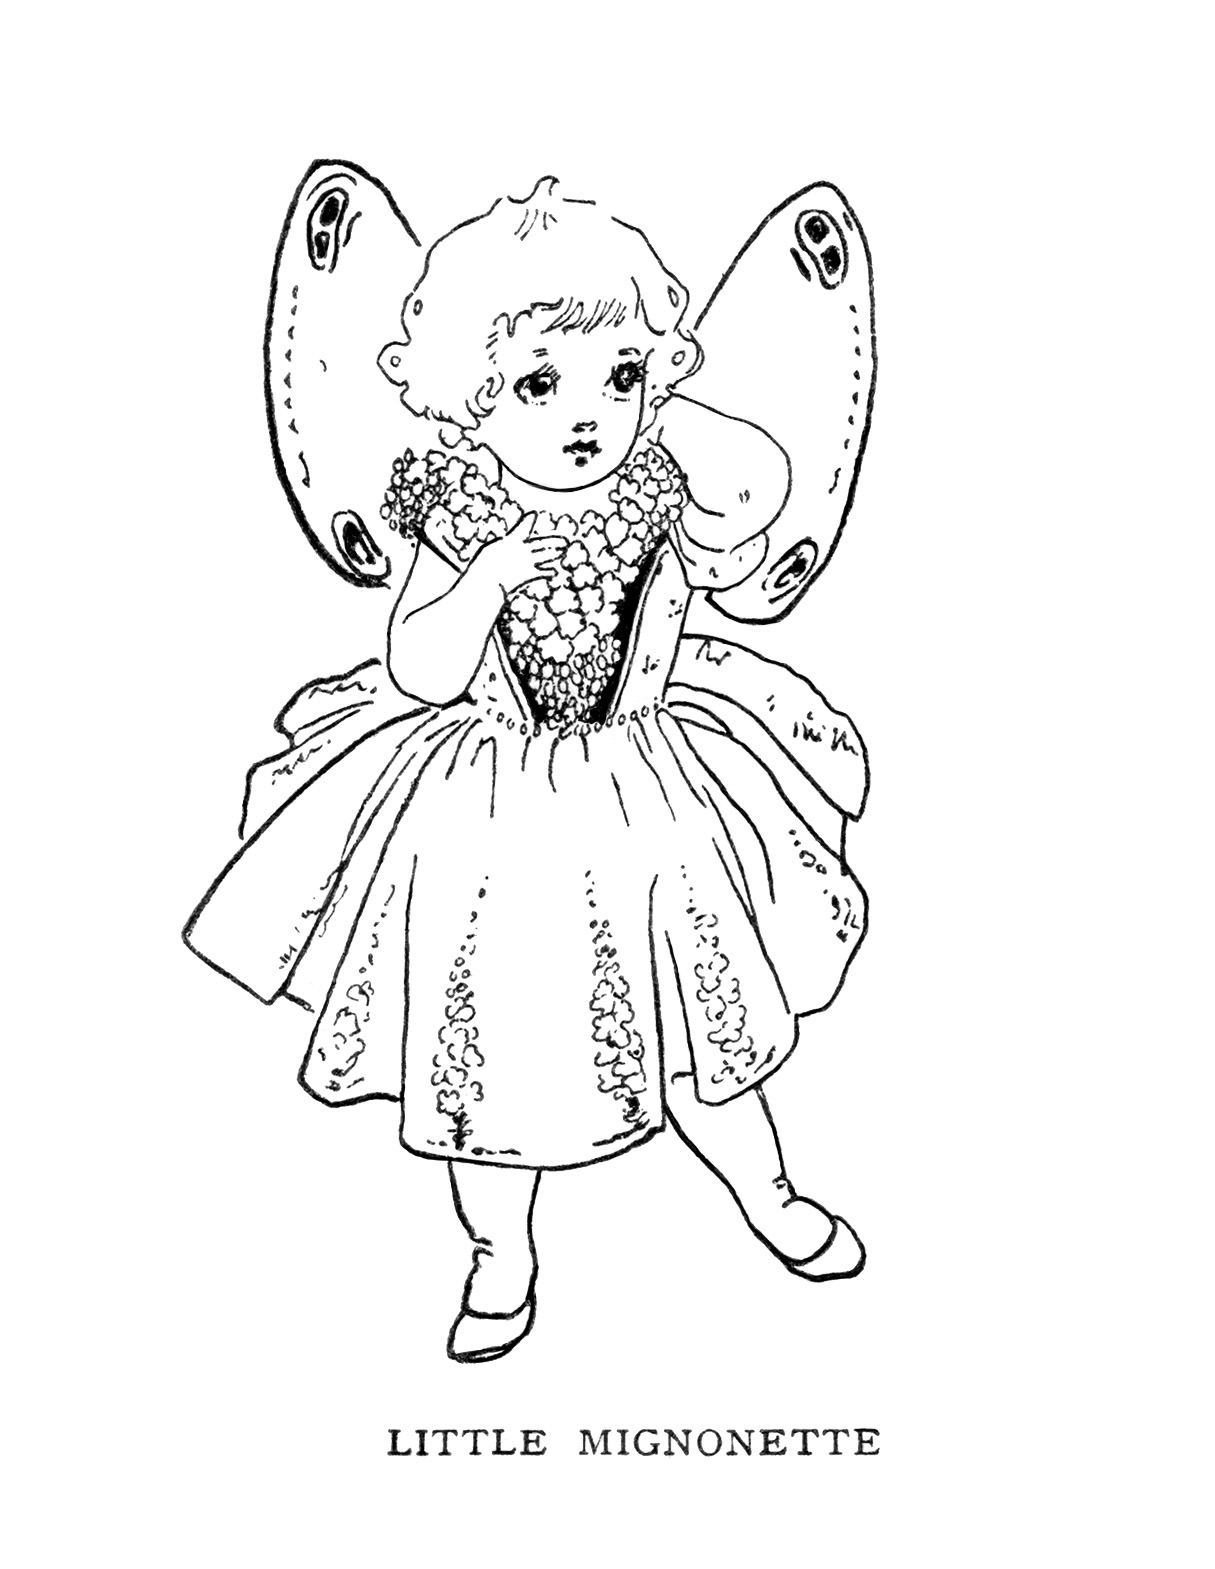 vintage storybook illustration, fairy clip art, black and white clipart, little mignonette character, antique childrens graphics